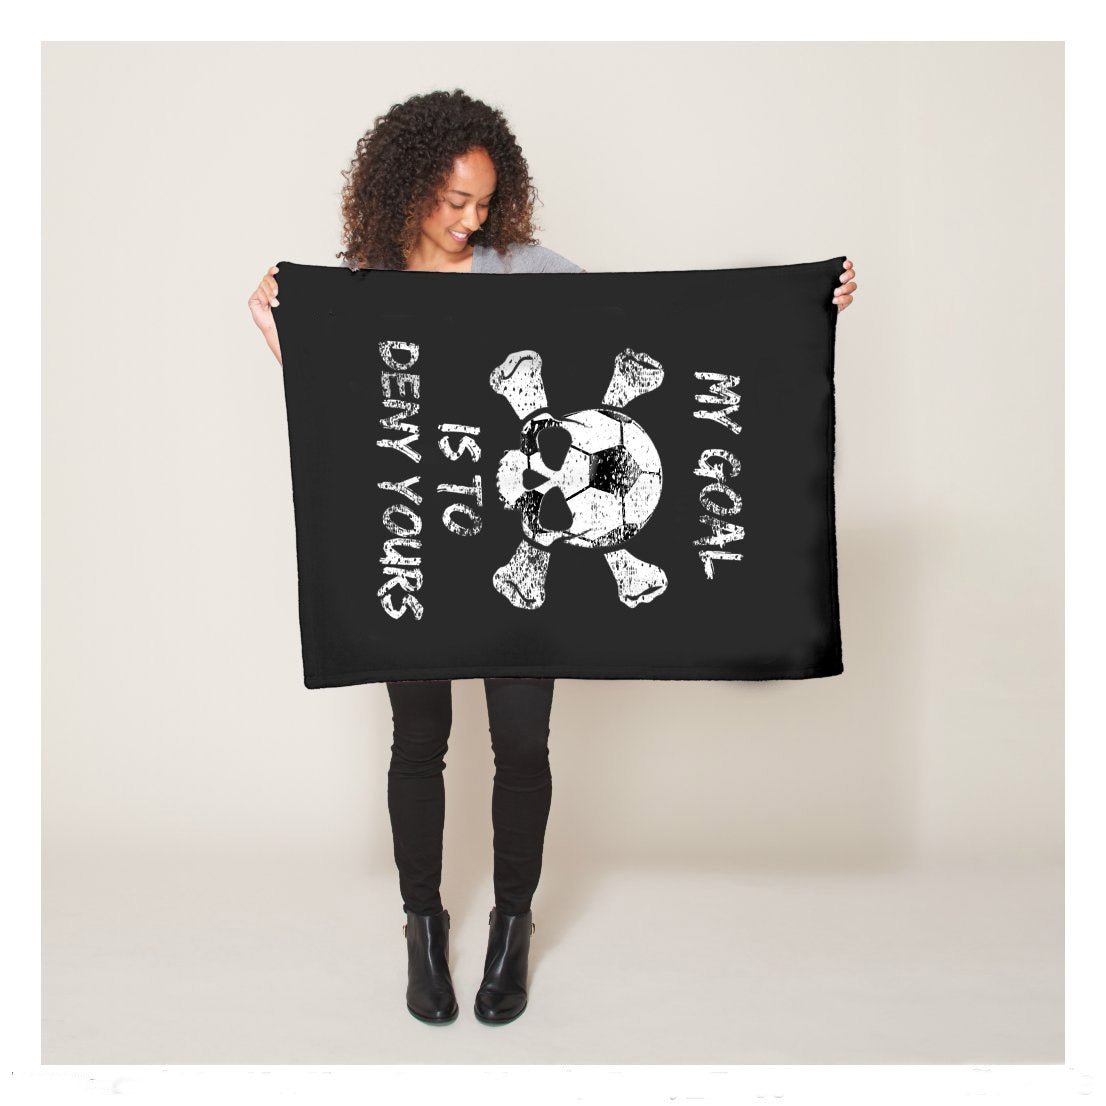 Funny My Goal Is To Deny Yours Soccer Goalie Defender Fleece Blanket,  Soccer Outdoor Blankets, Soccer Gifts For Coach And Soccer Players, Birthday Gift For Soccer Player